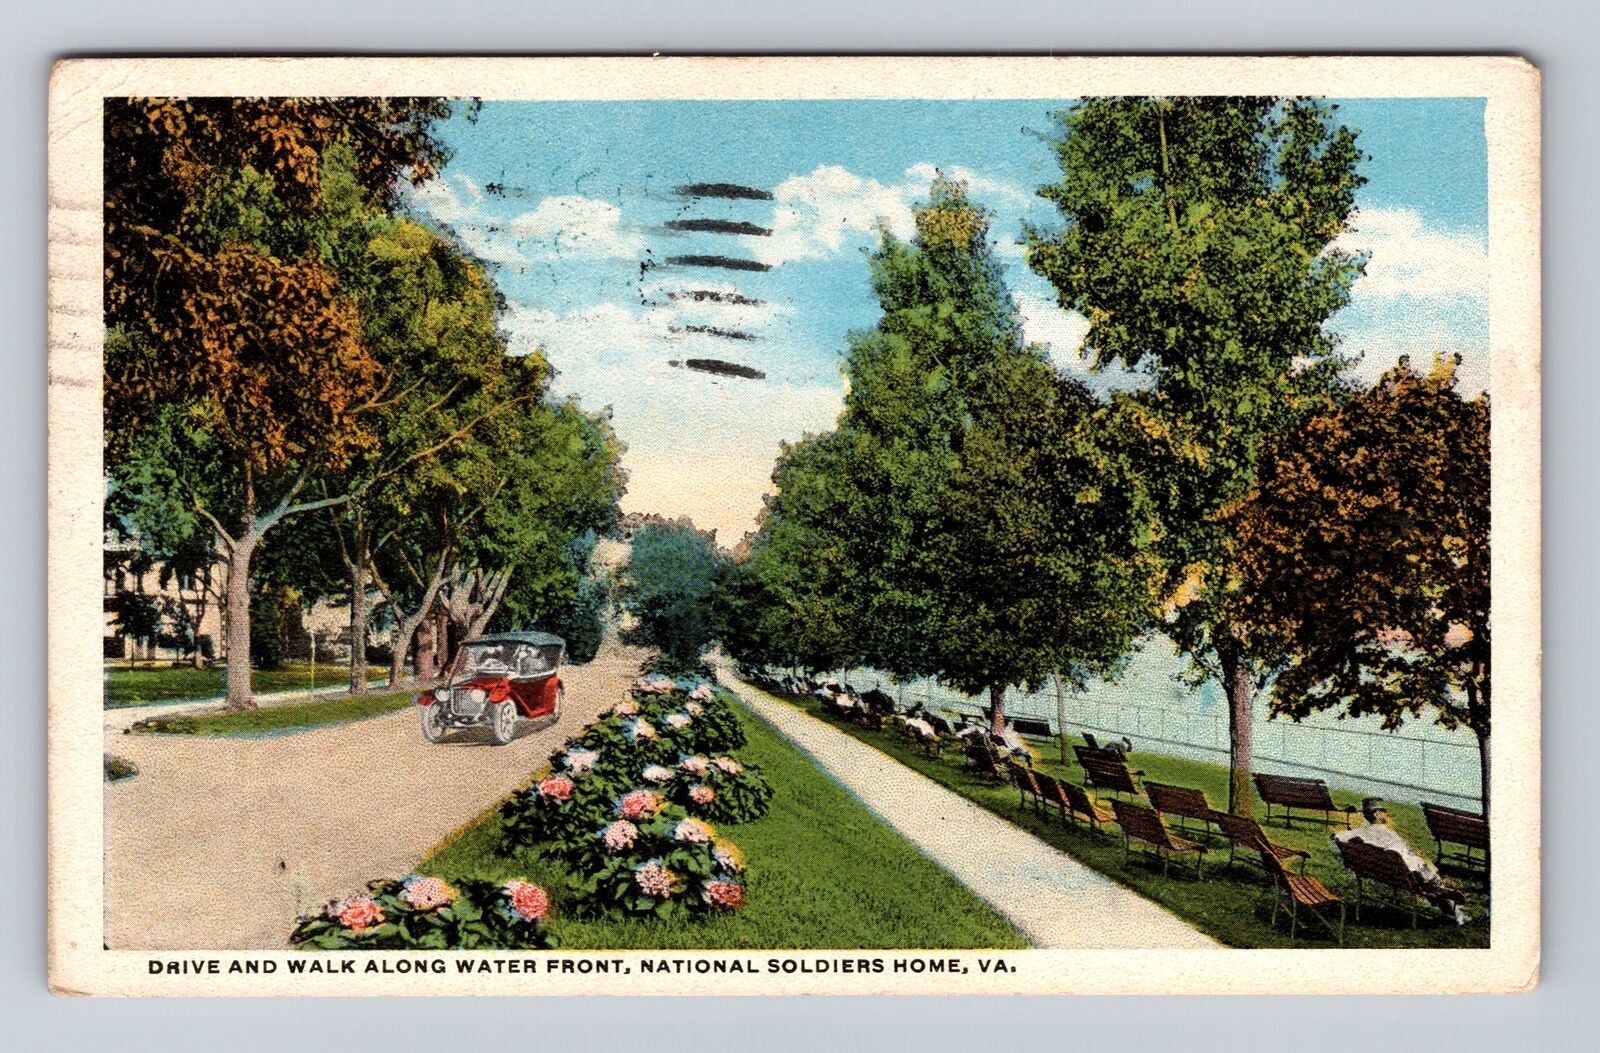 VA-Virginia, Drive And Walk Along Water, Soldiers Home, Vintage c1918 Postcard